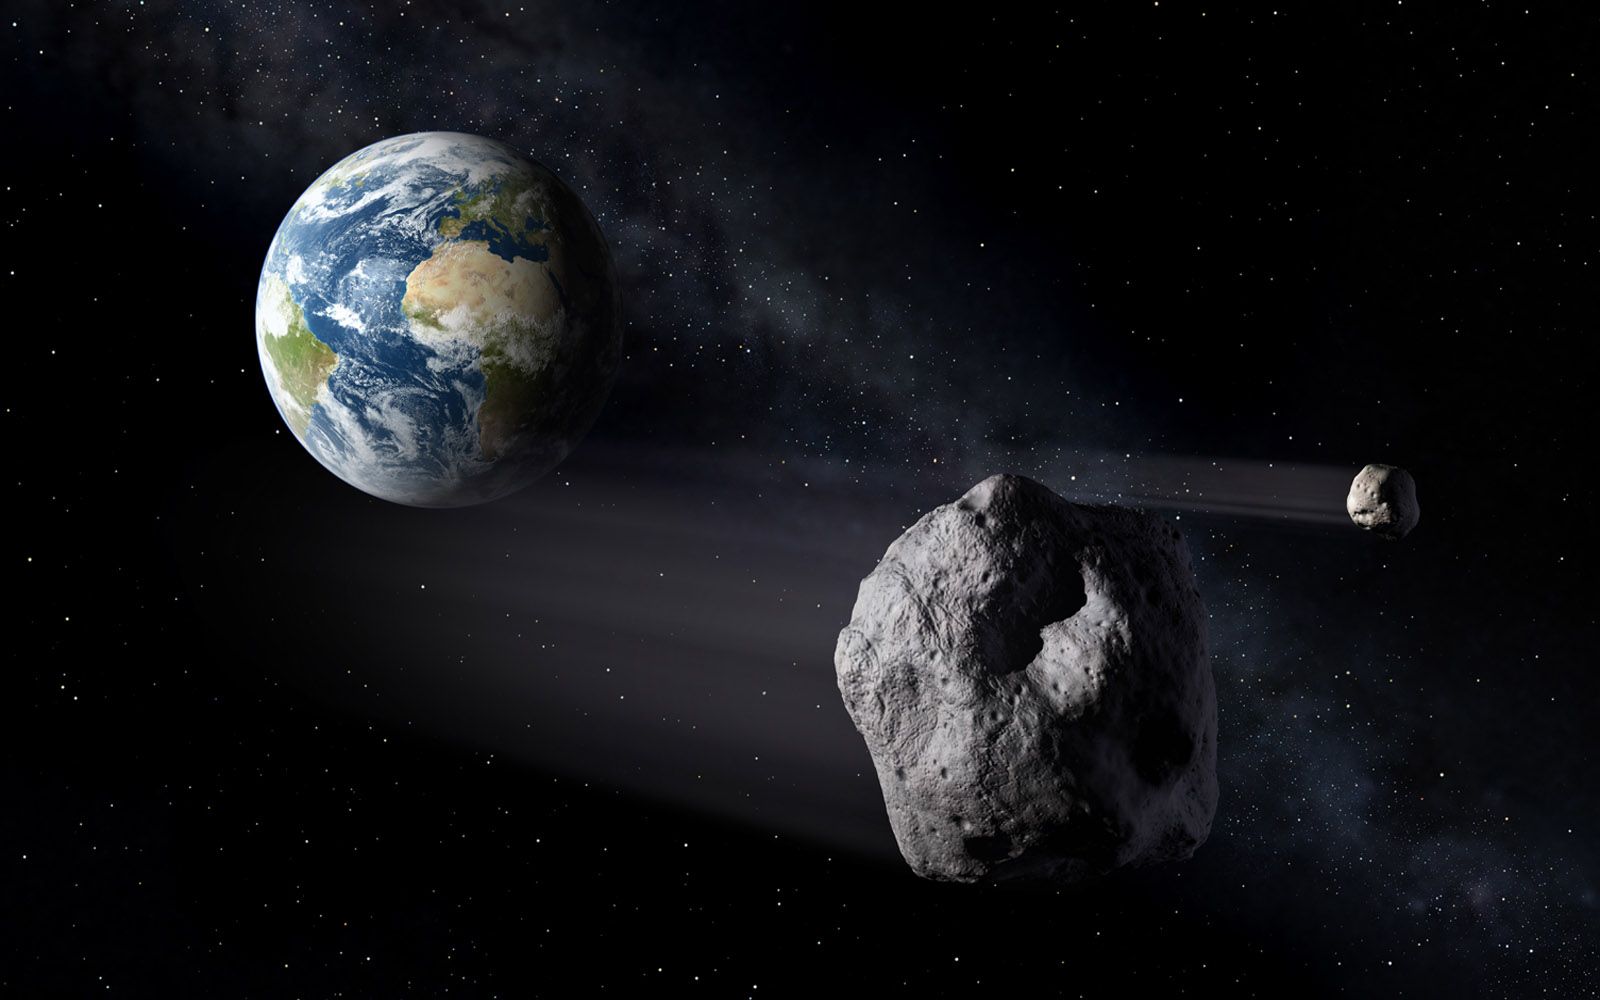 HD wallpaper, And, Asteroid, Earth, Wallpaper